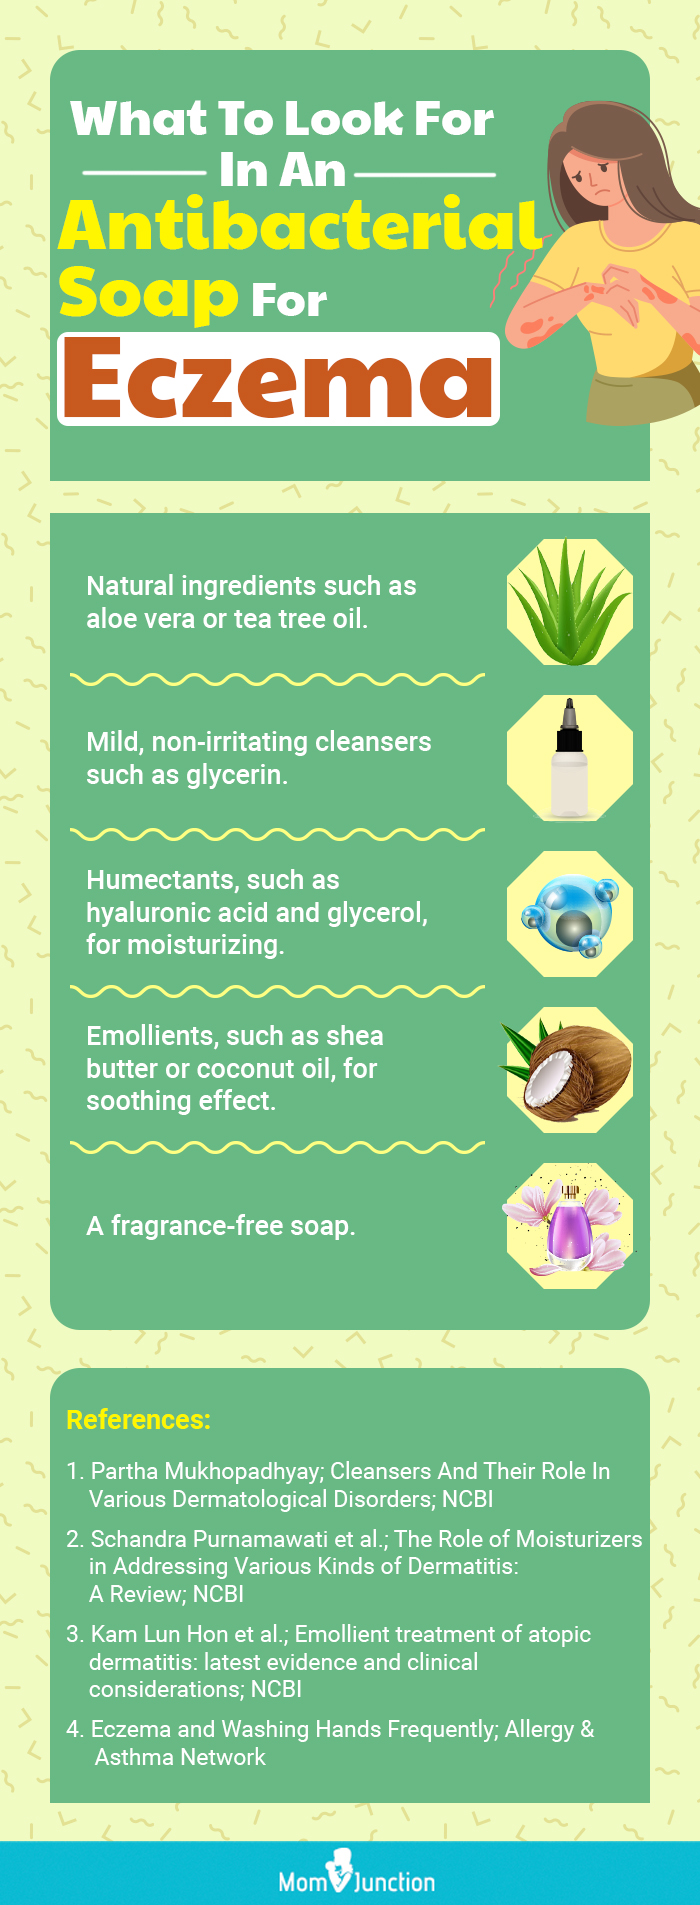 What To Look For In An Antibacterial Soap For Eczema (infographic)